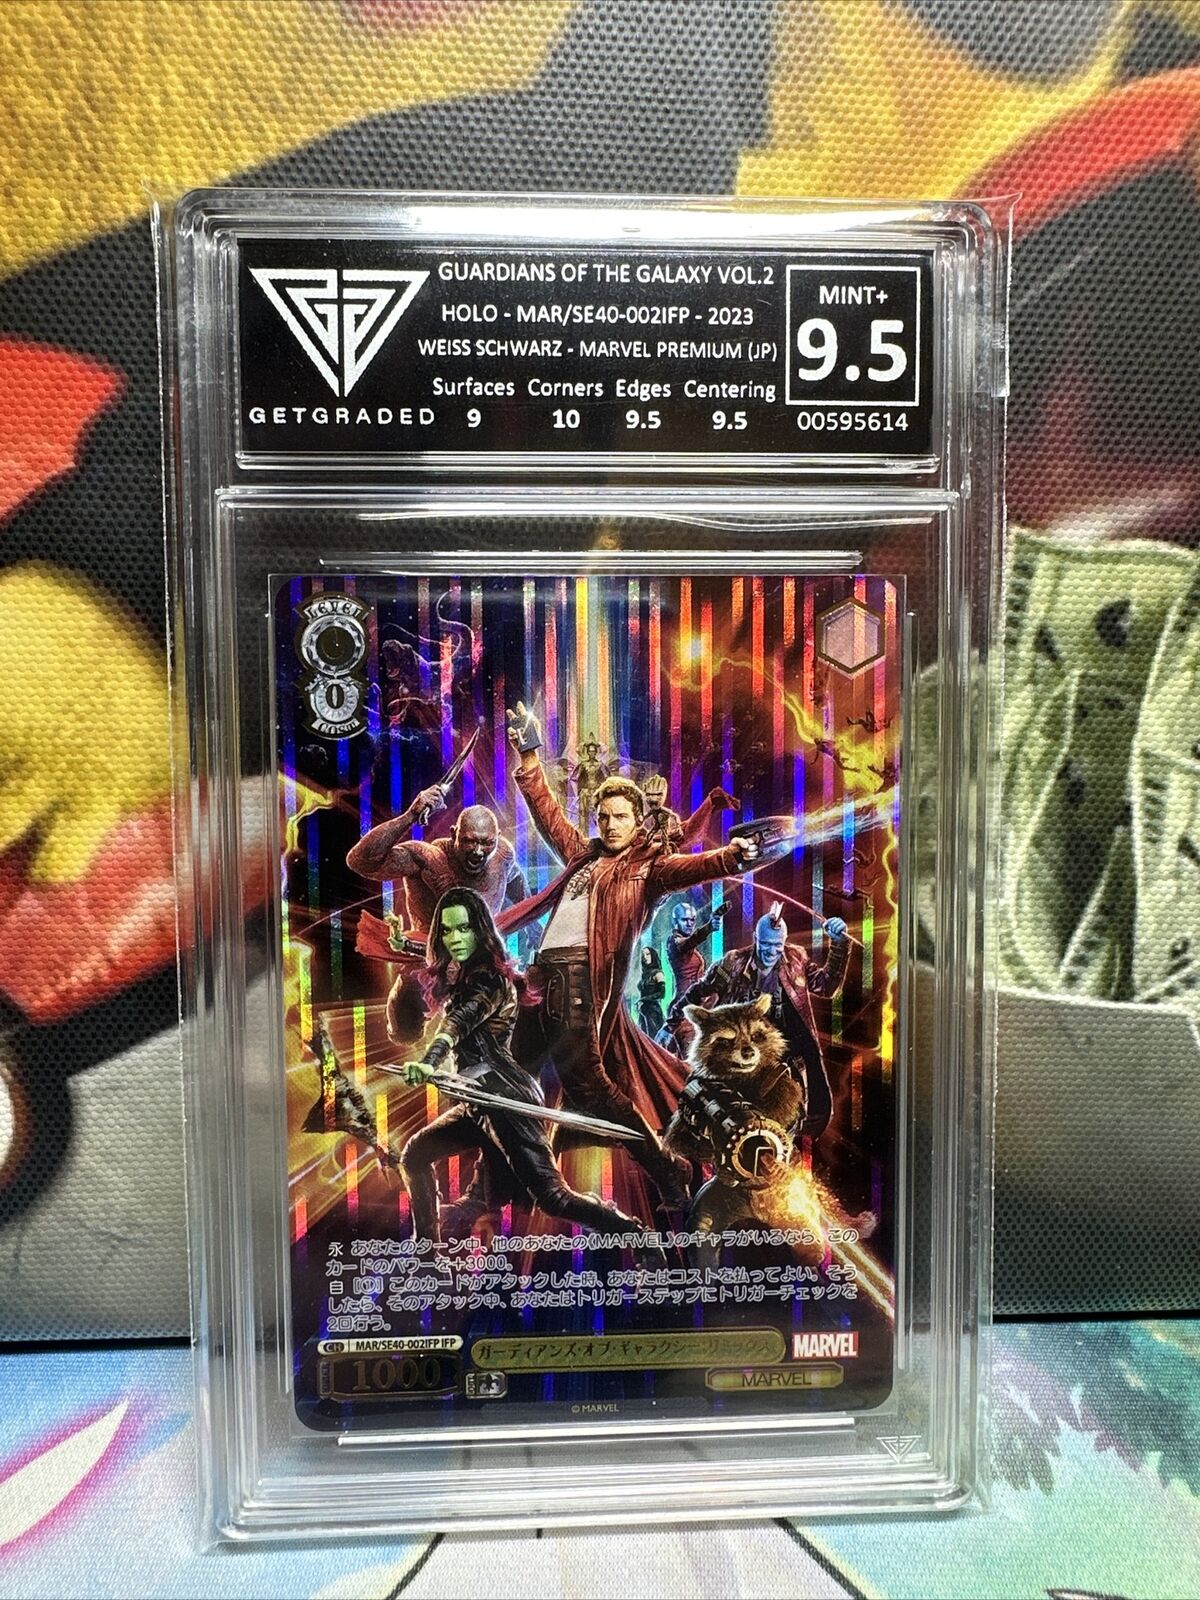 Guardians Of The Galaxy Vol 2 SE40-002IFP Marvel GetGraded 9.5 Not PSA BGS